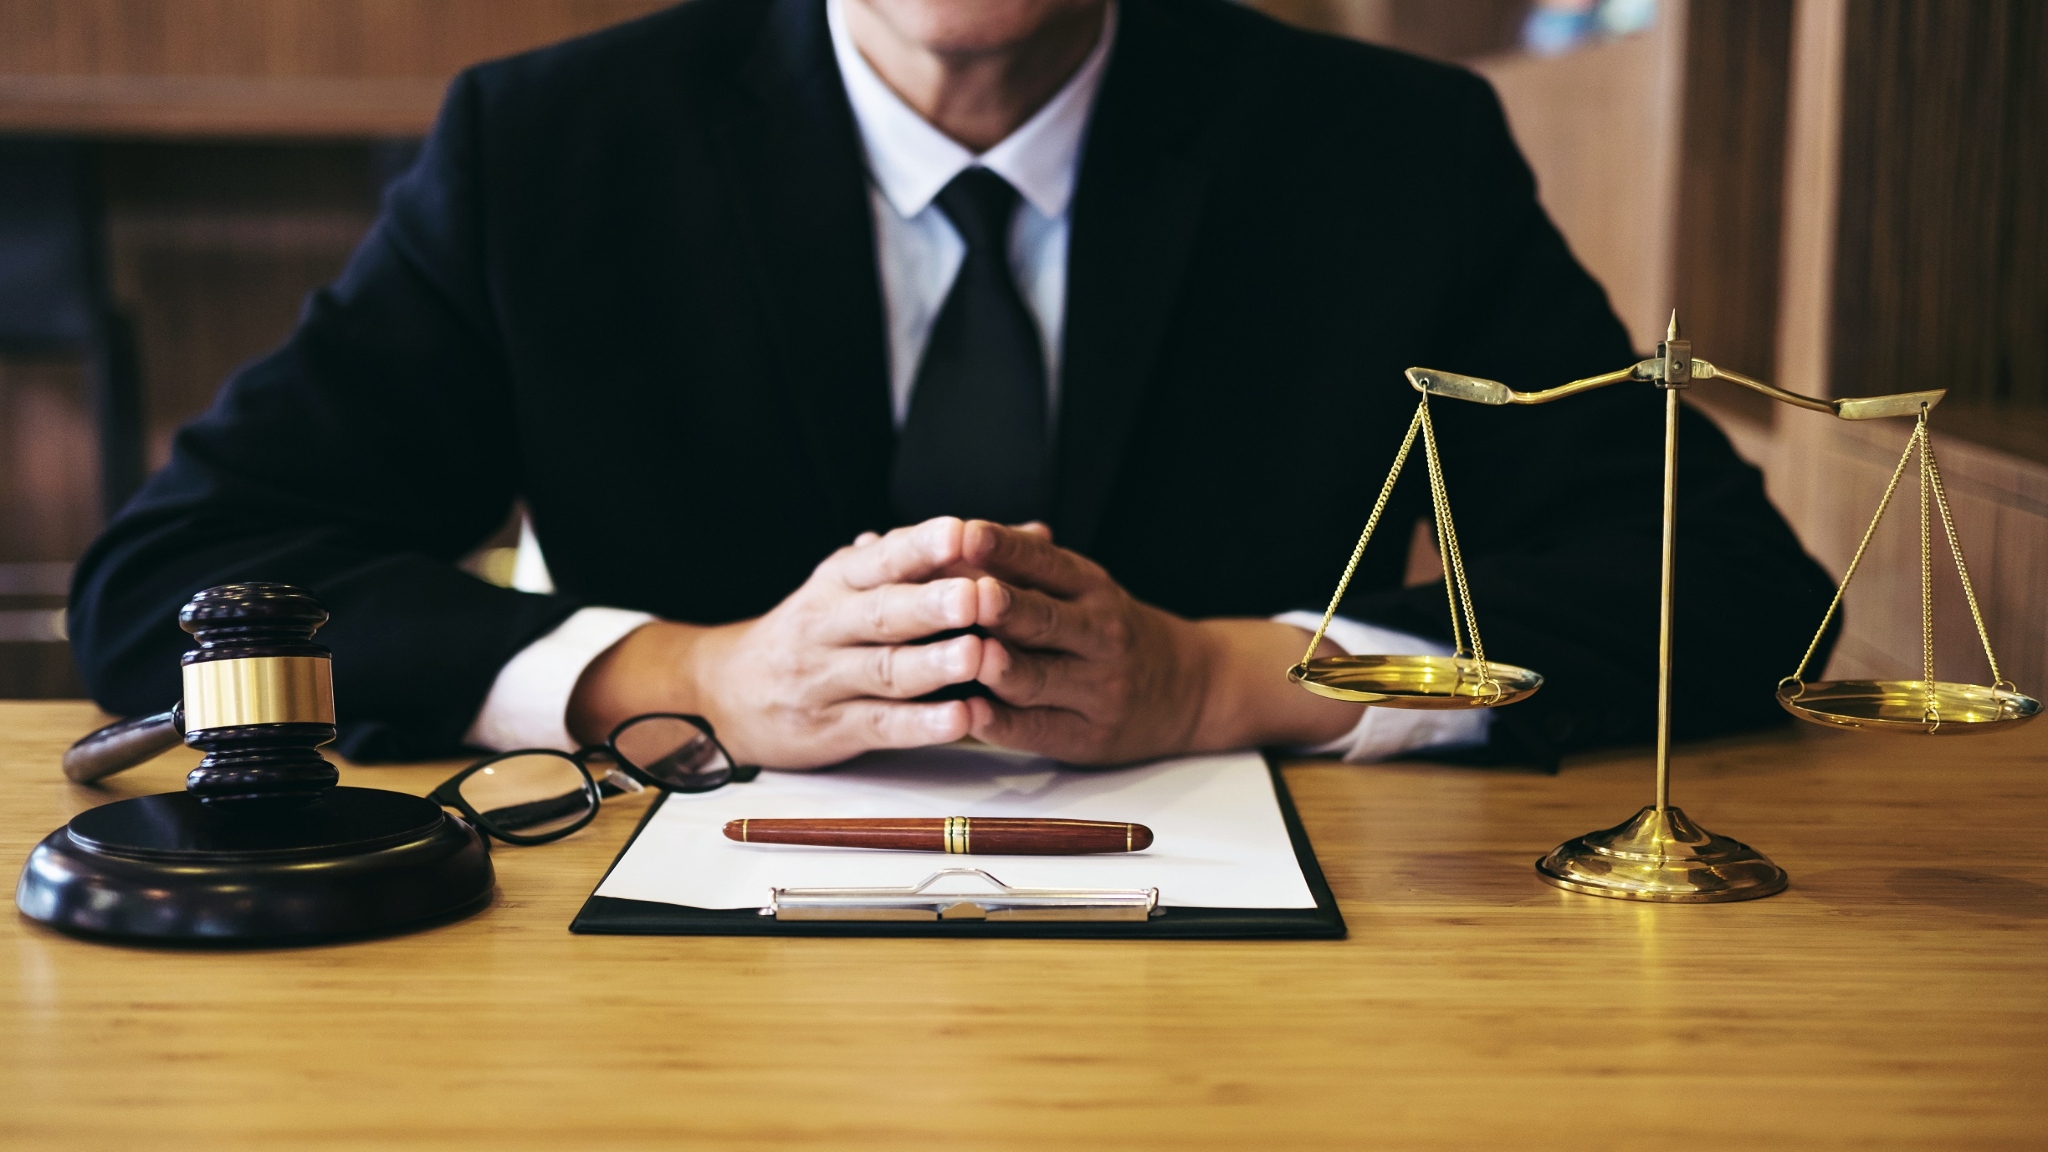 What to Think About When Working Remotely as an Attorney